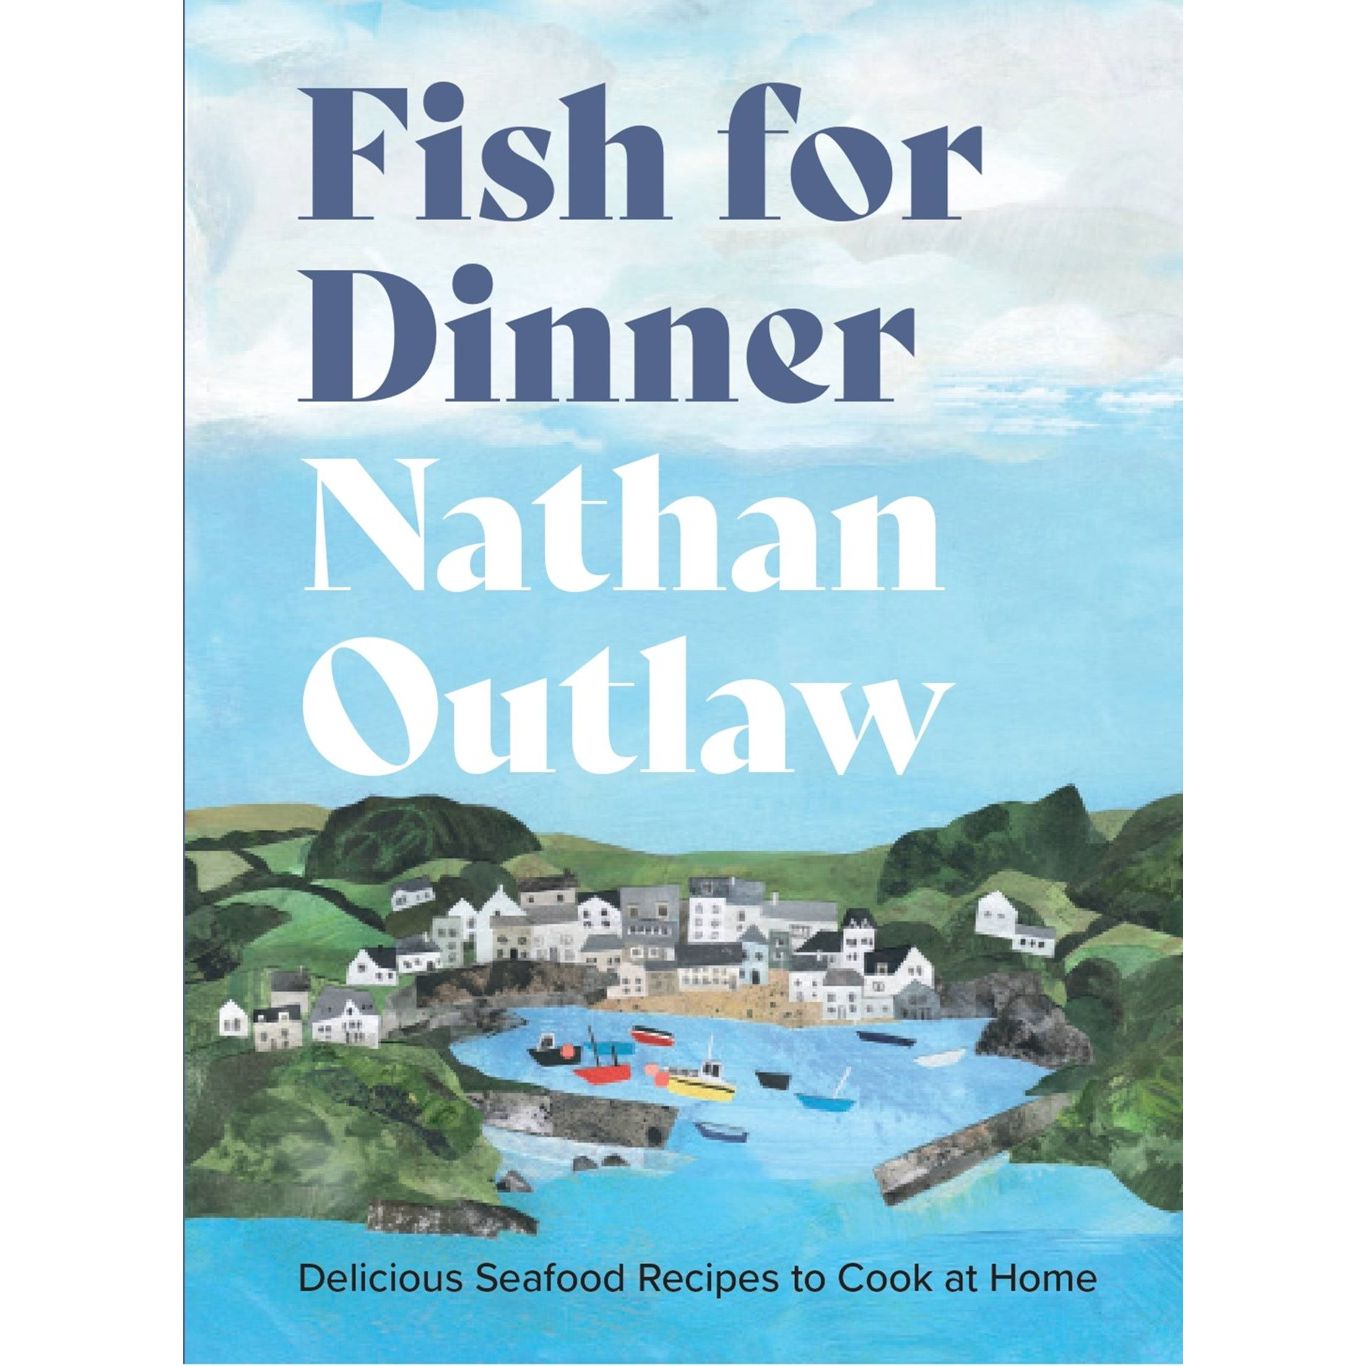 Fish for Dinner (Nathan Outlaw)